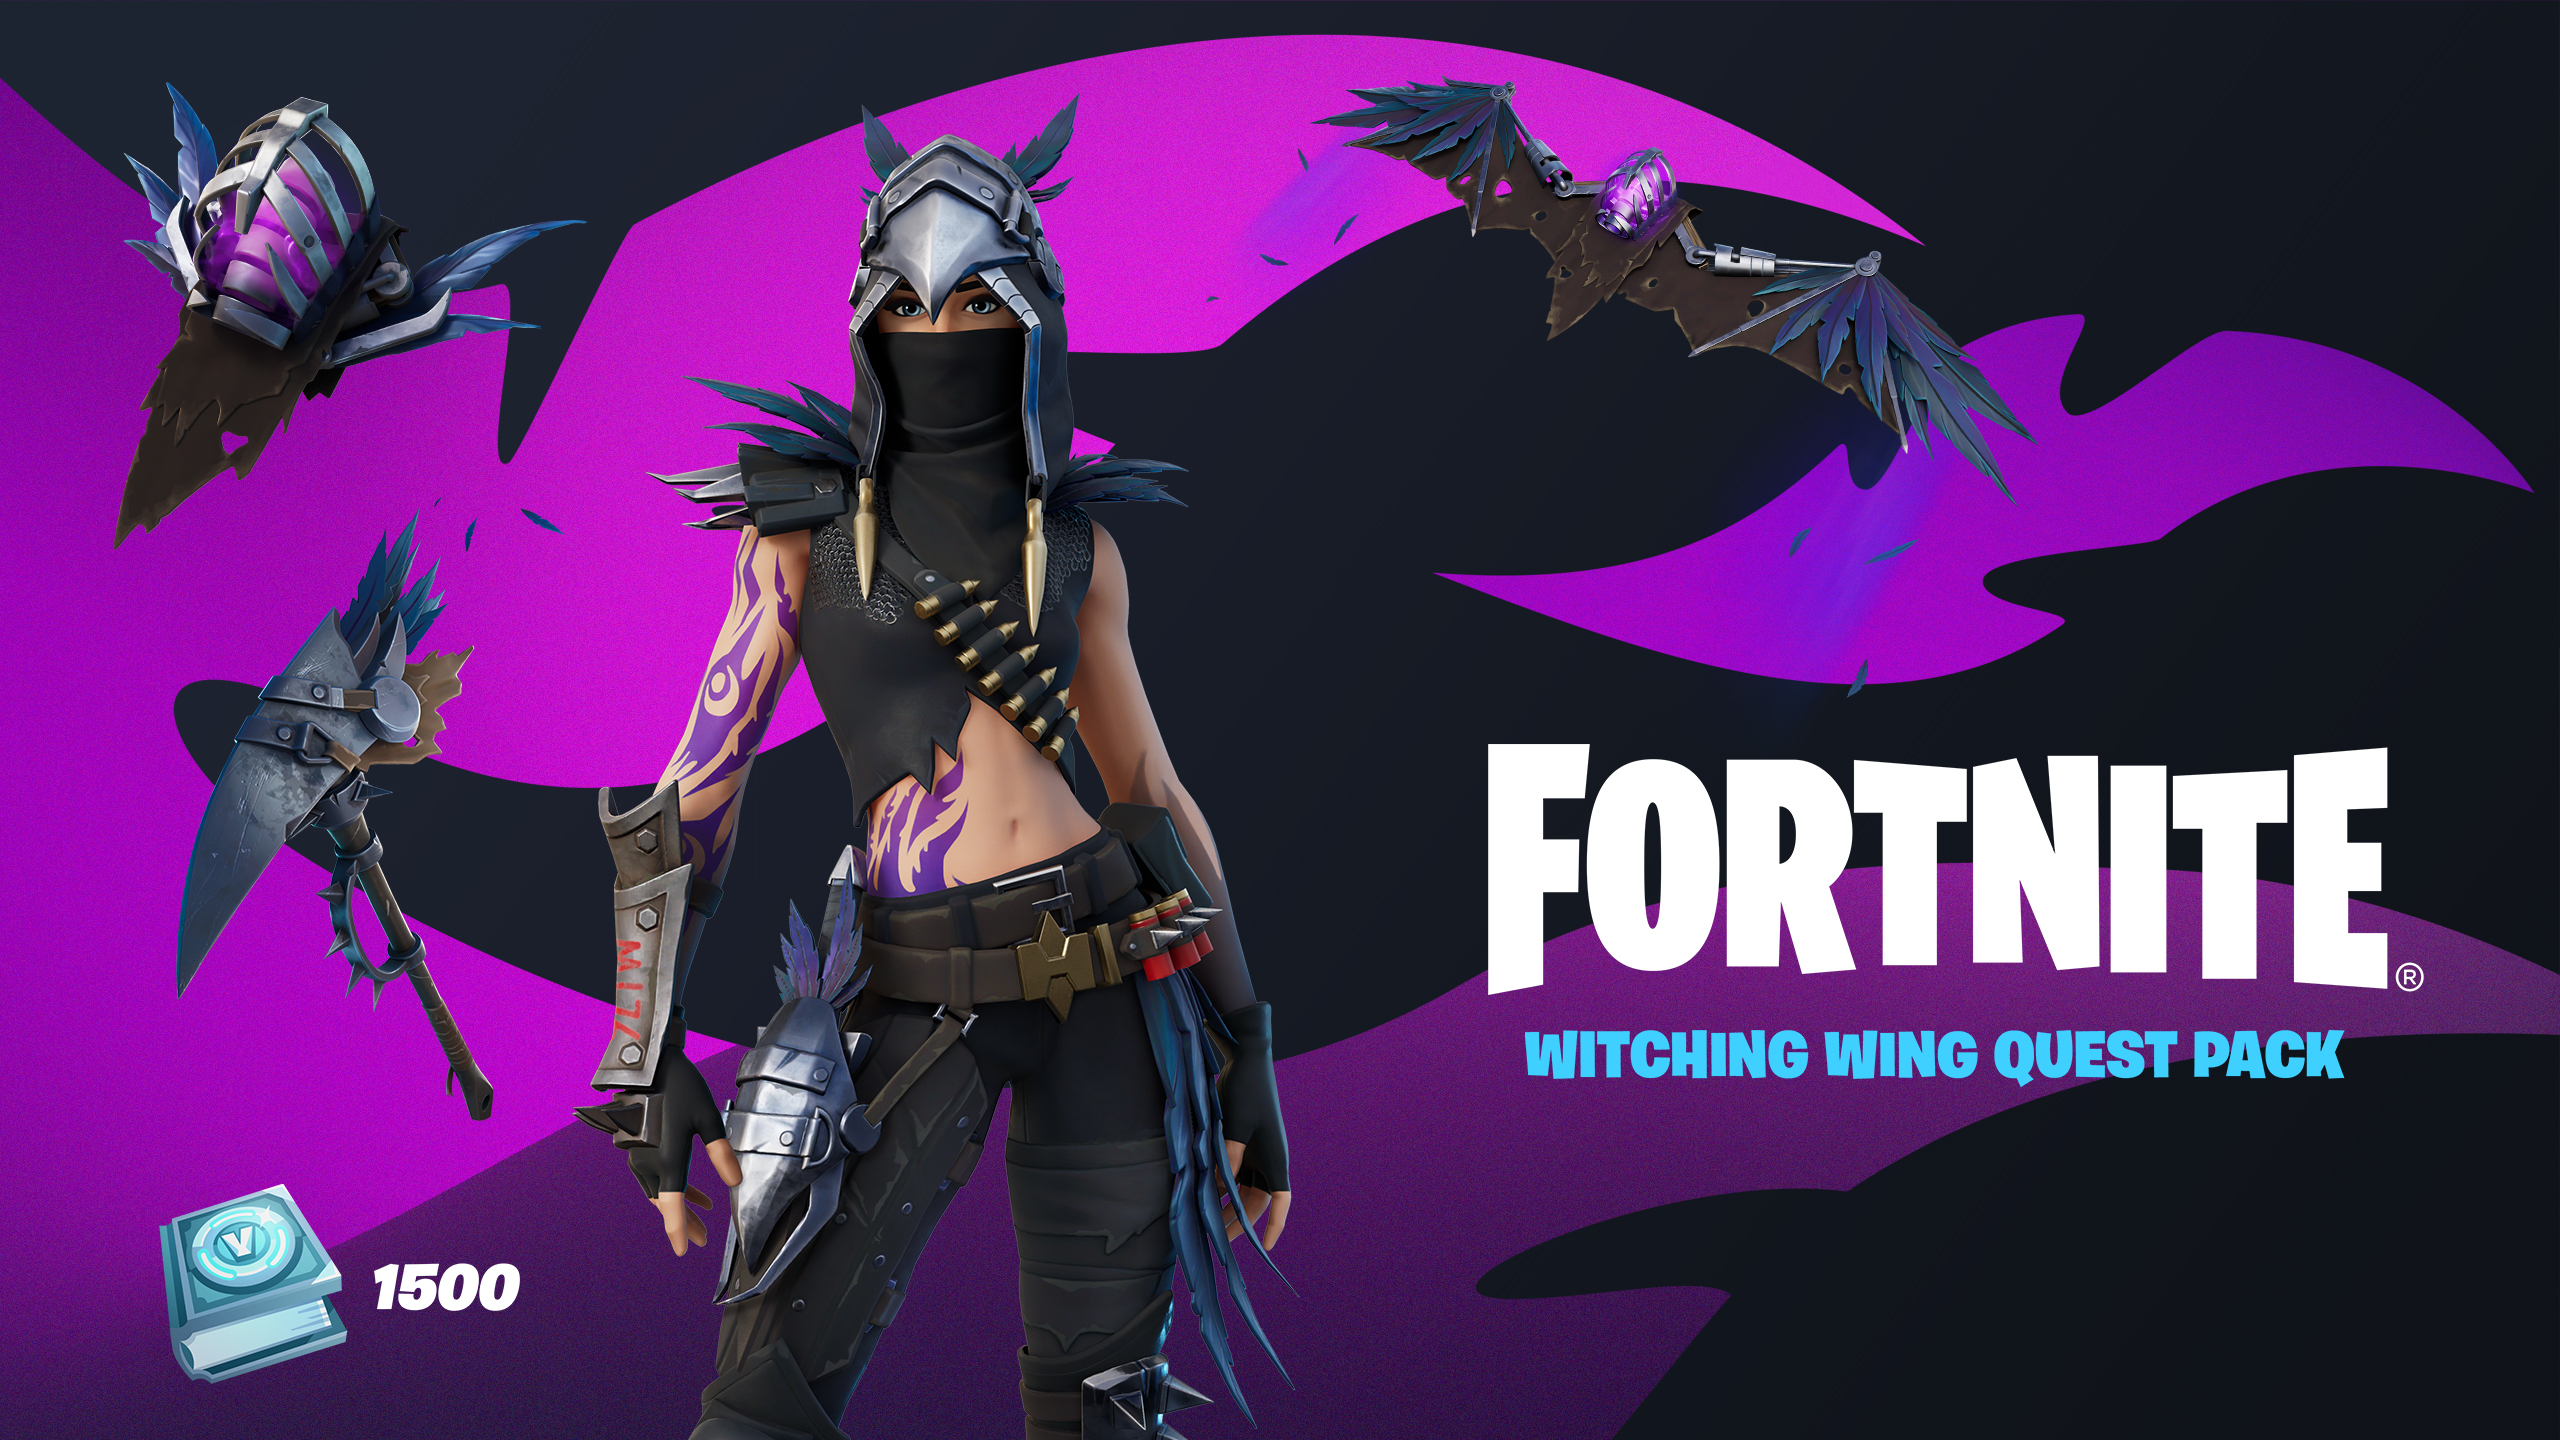 Fortnite - Witching Wing Quest Pack EU XBOX One / Xbox Series X|S CD Key 154.8$